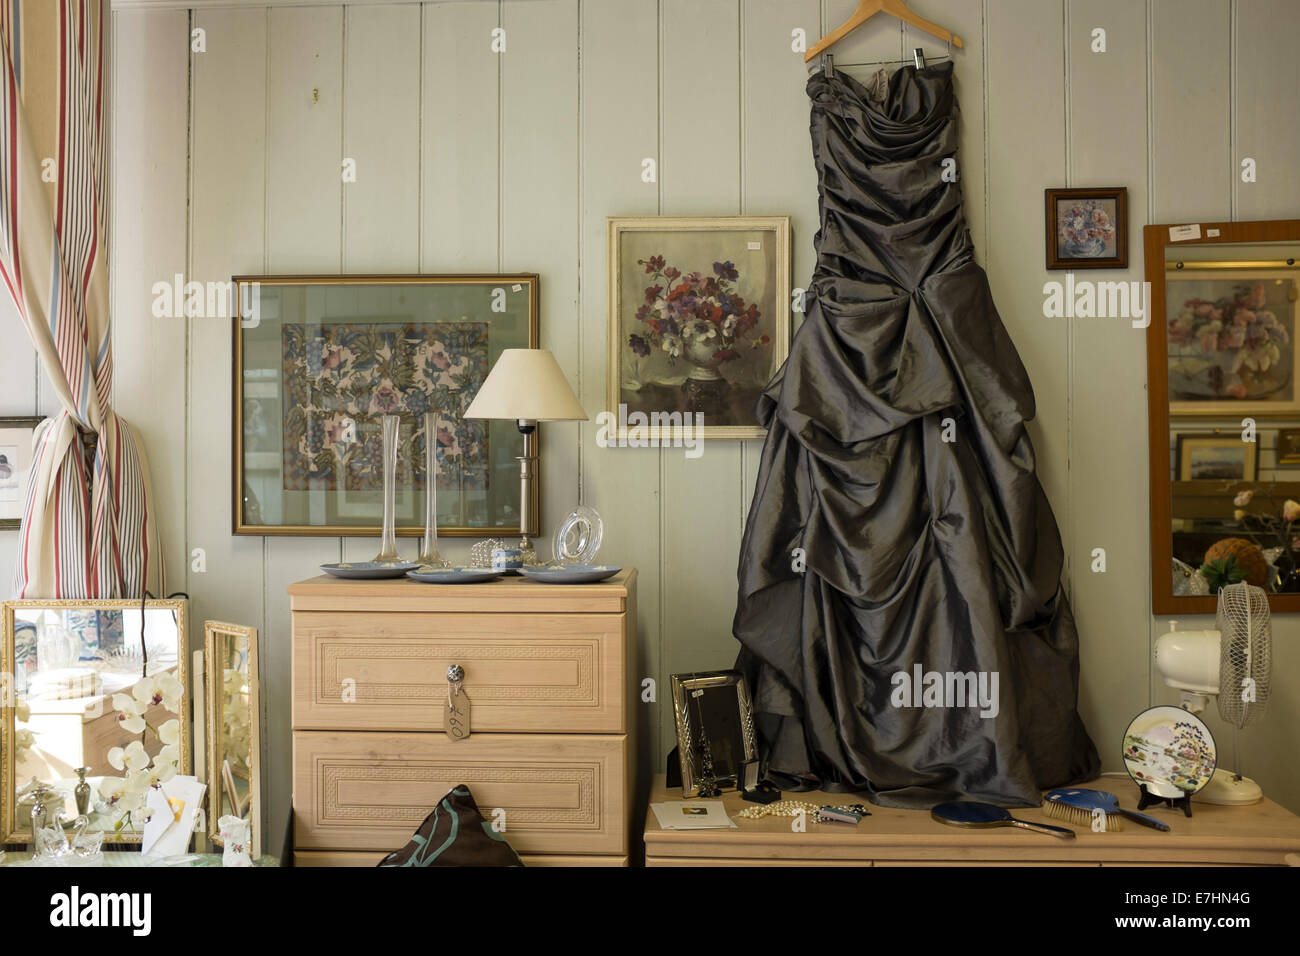 Beautiful old dress in charity shop display with various objects and pictures Stock Photo